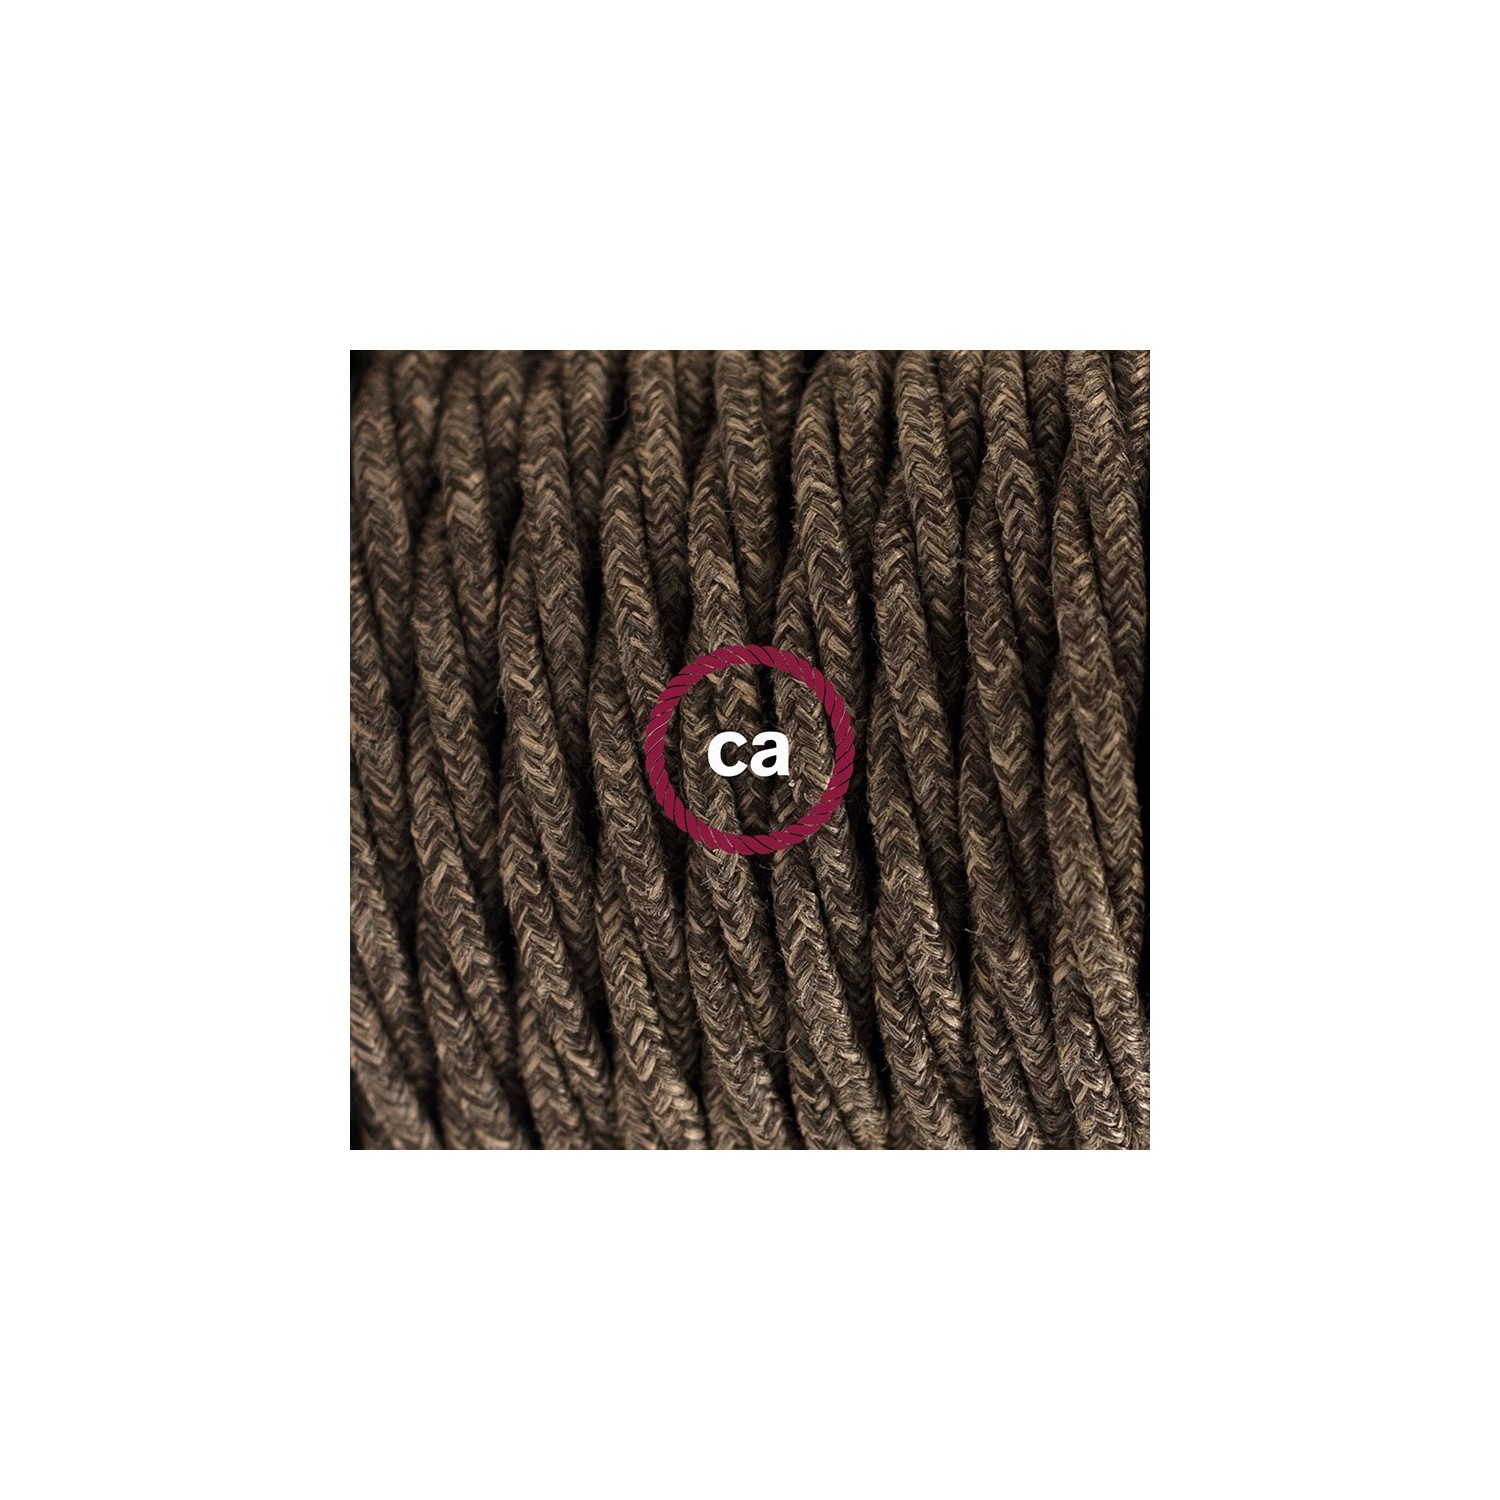 Create your TN04 Brown Natural Linen Snake and bring the light wherever you want.